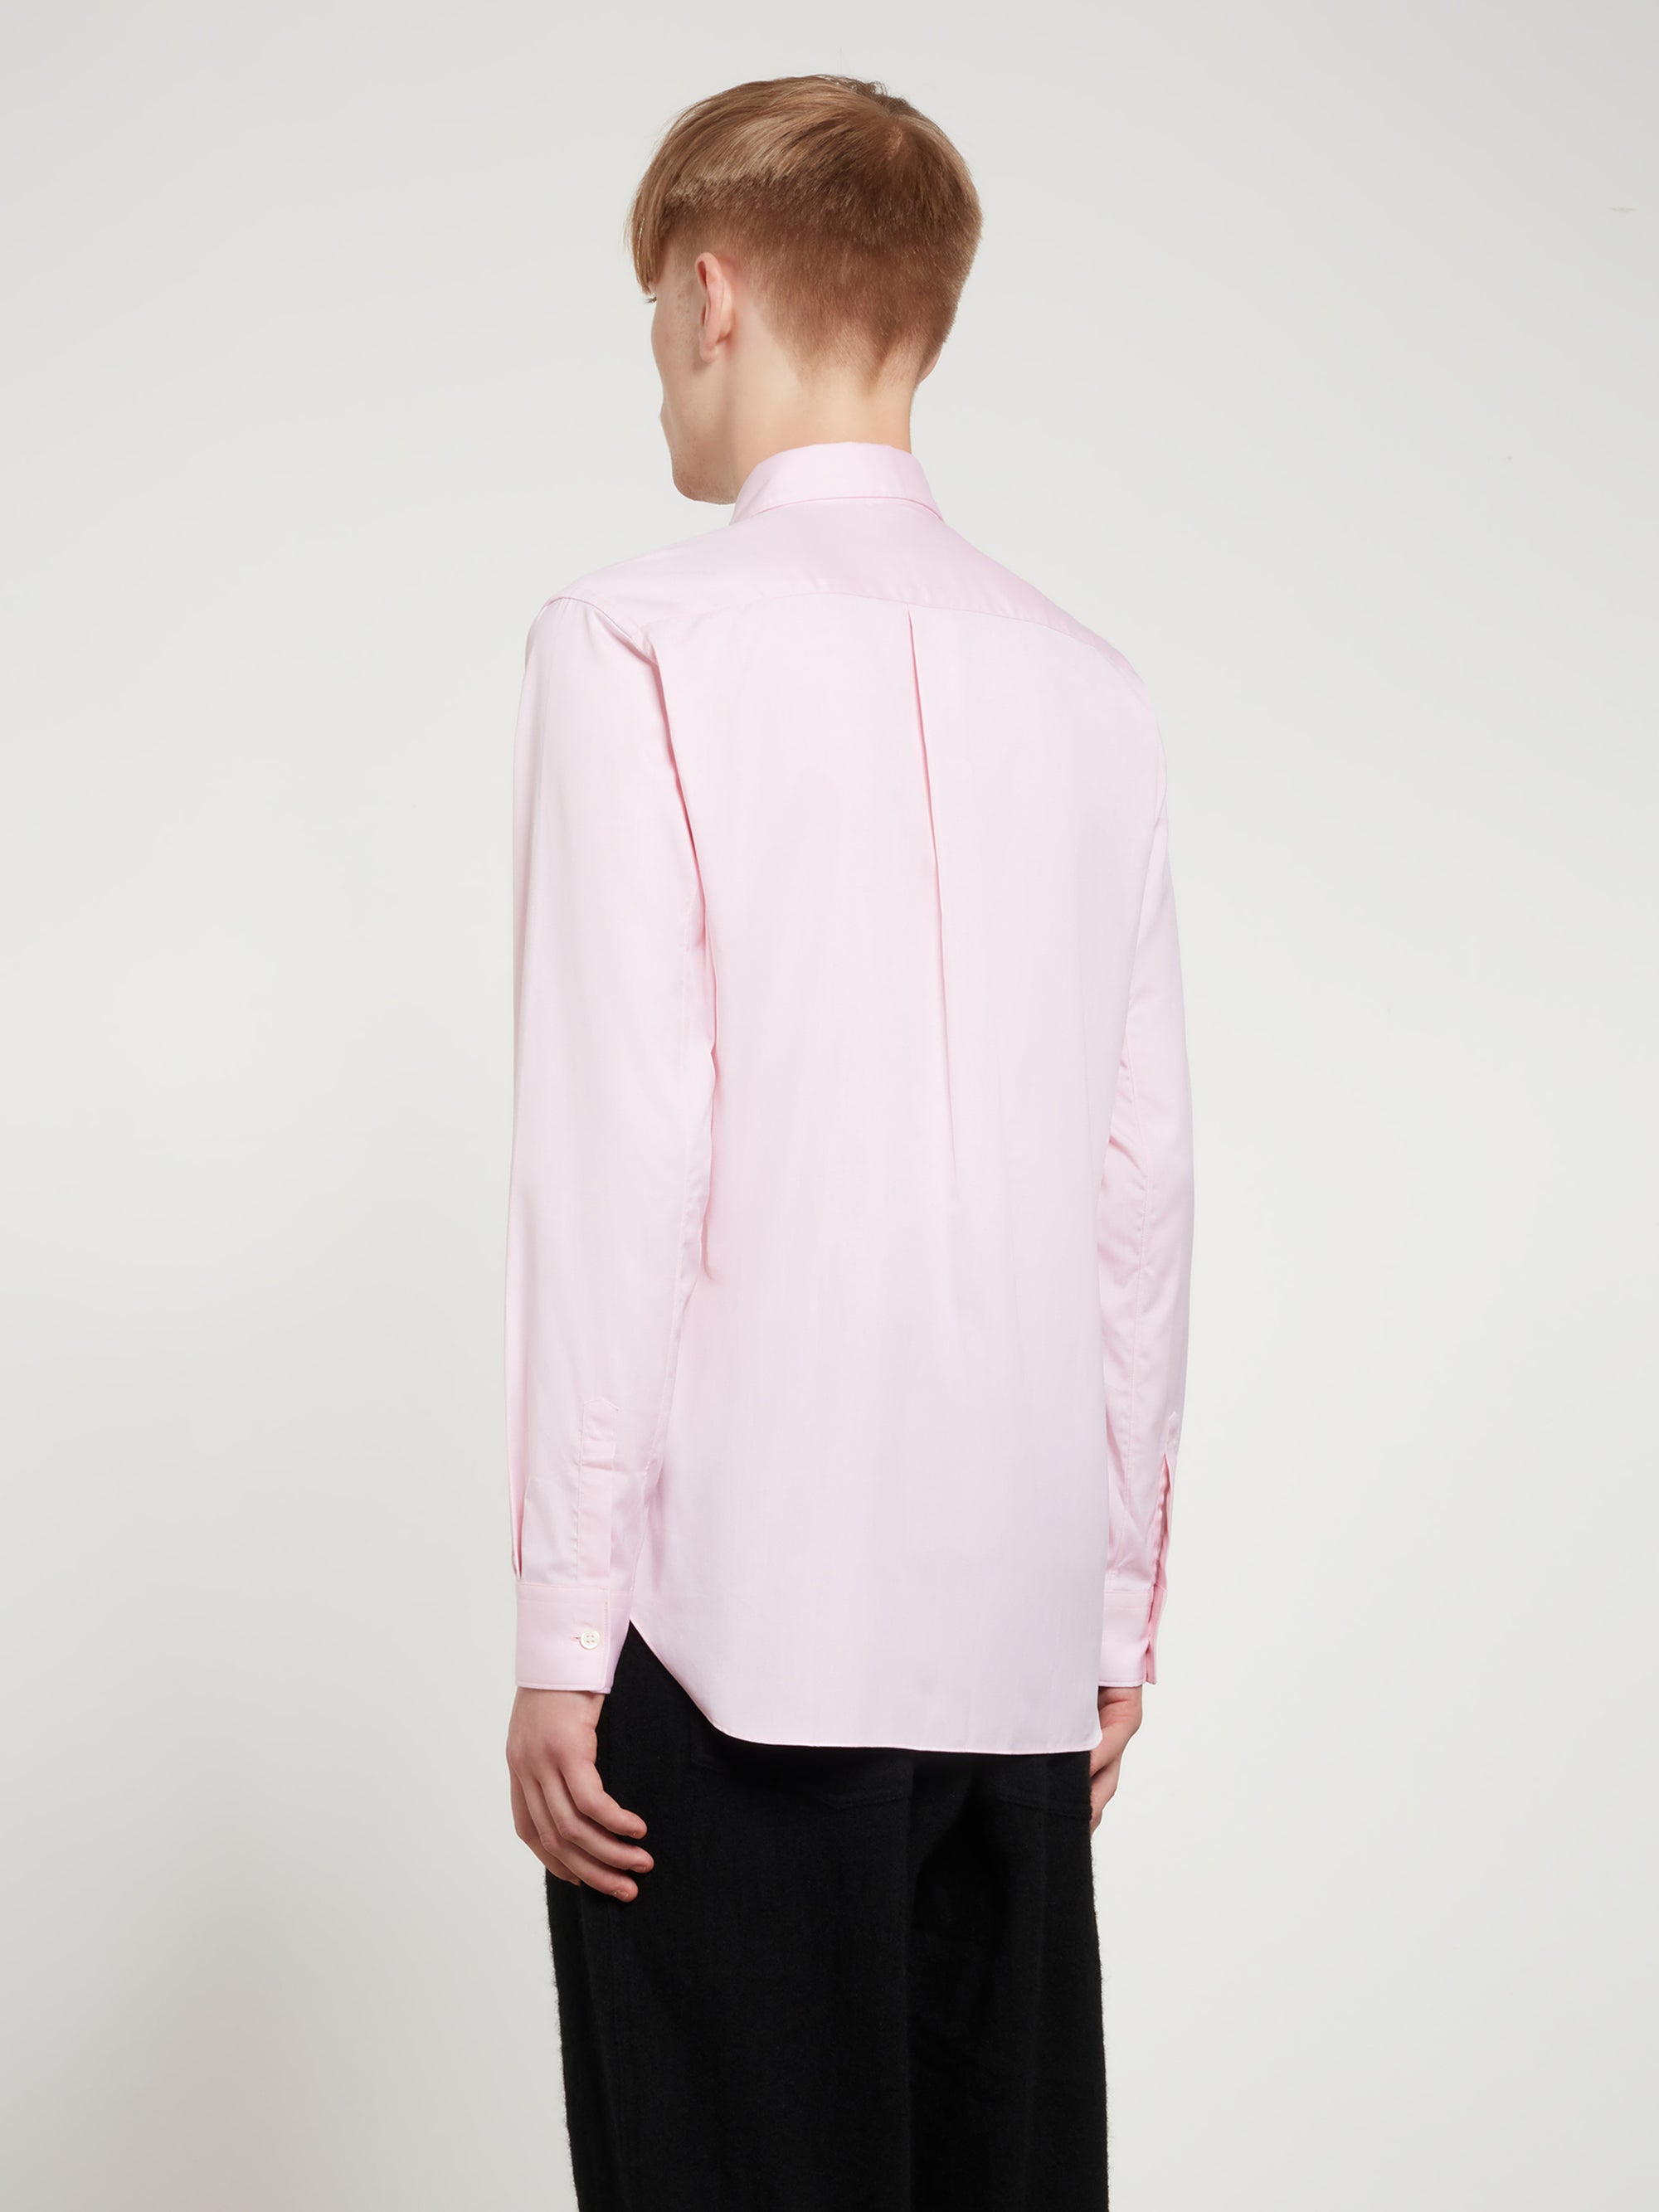 CDG Shirt Forever - Slim Fit Button-Down Cotton Shirt - (Pink) view 4